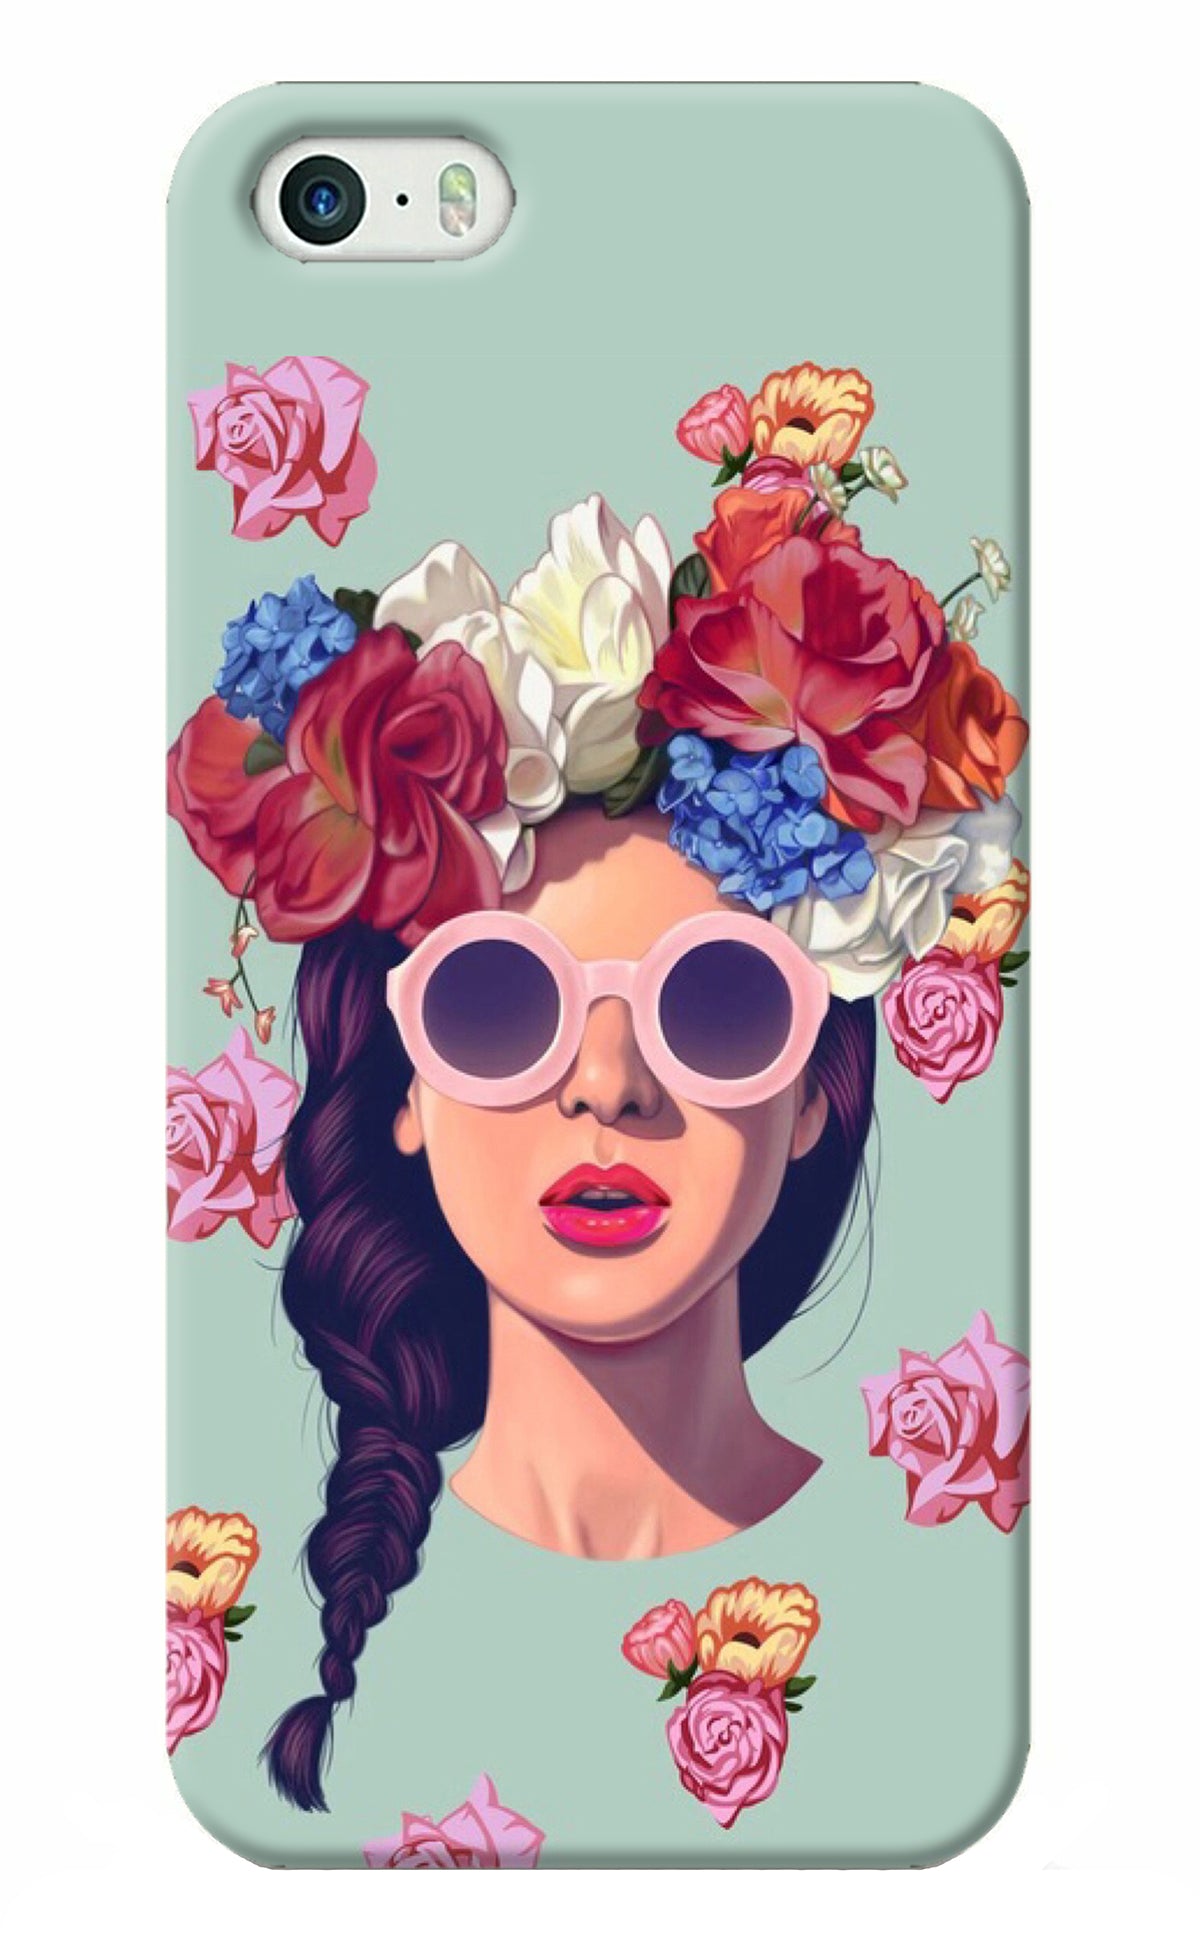 Pretty Girl iPhone 5/5s Back Cover